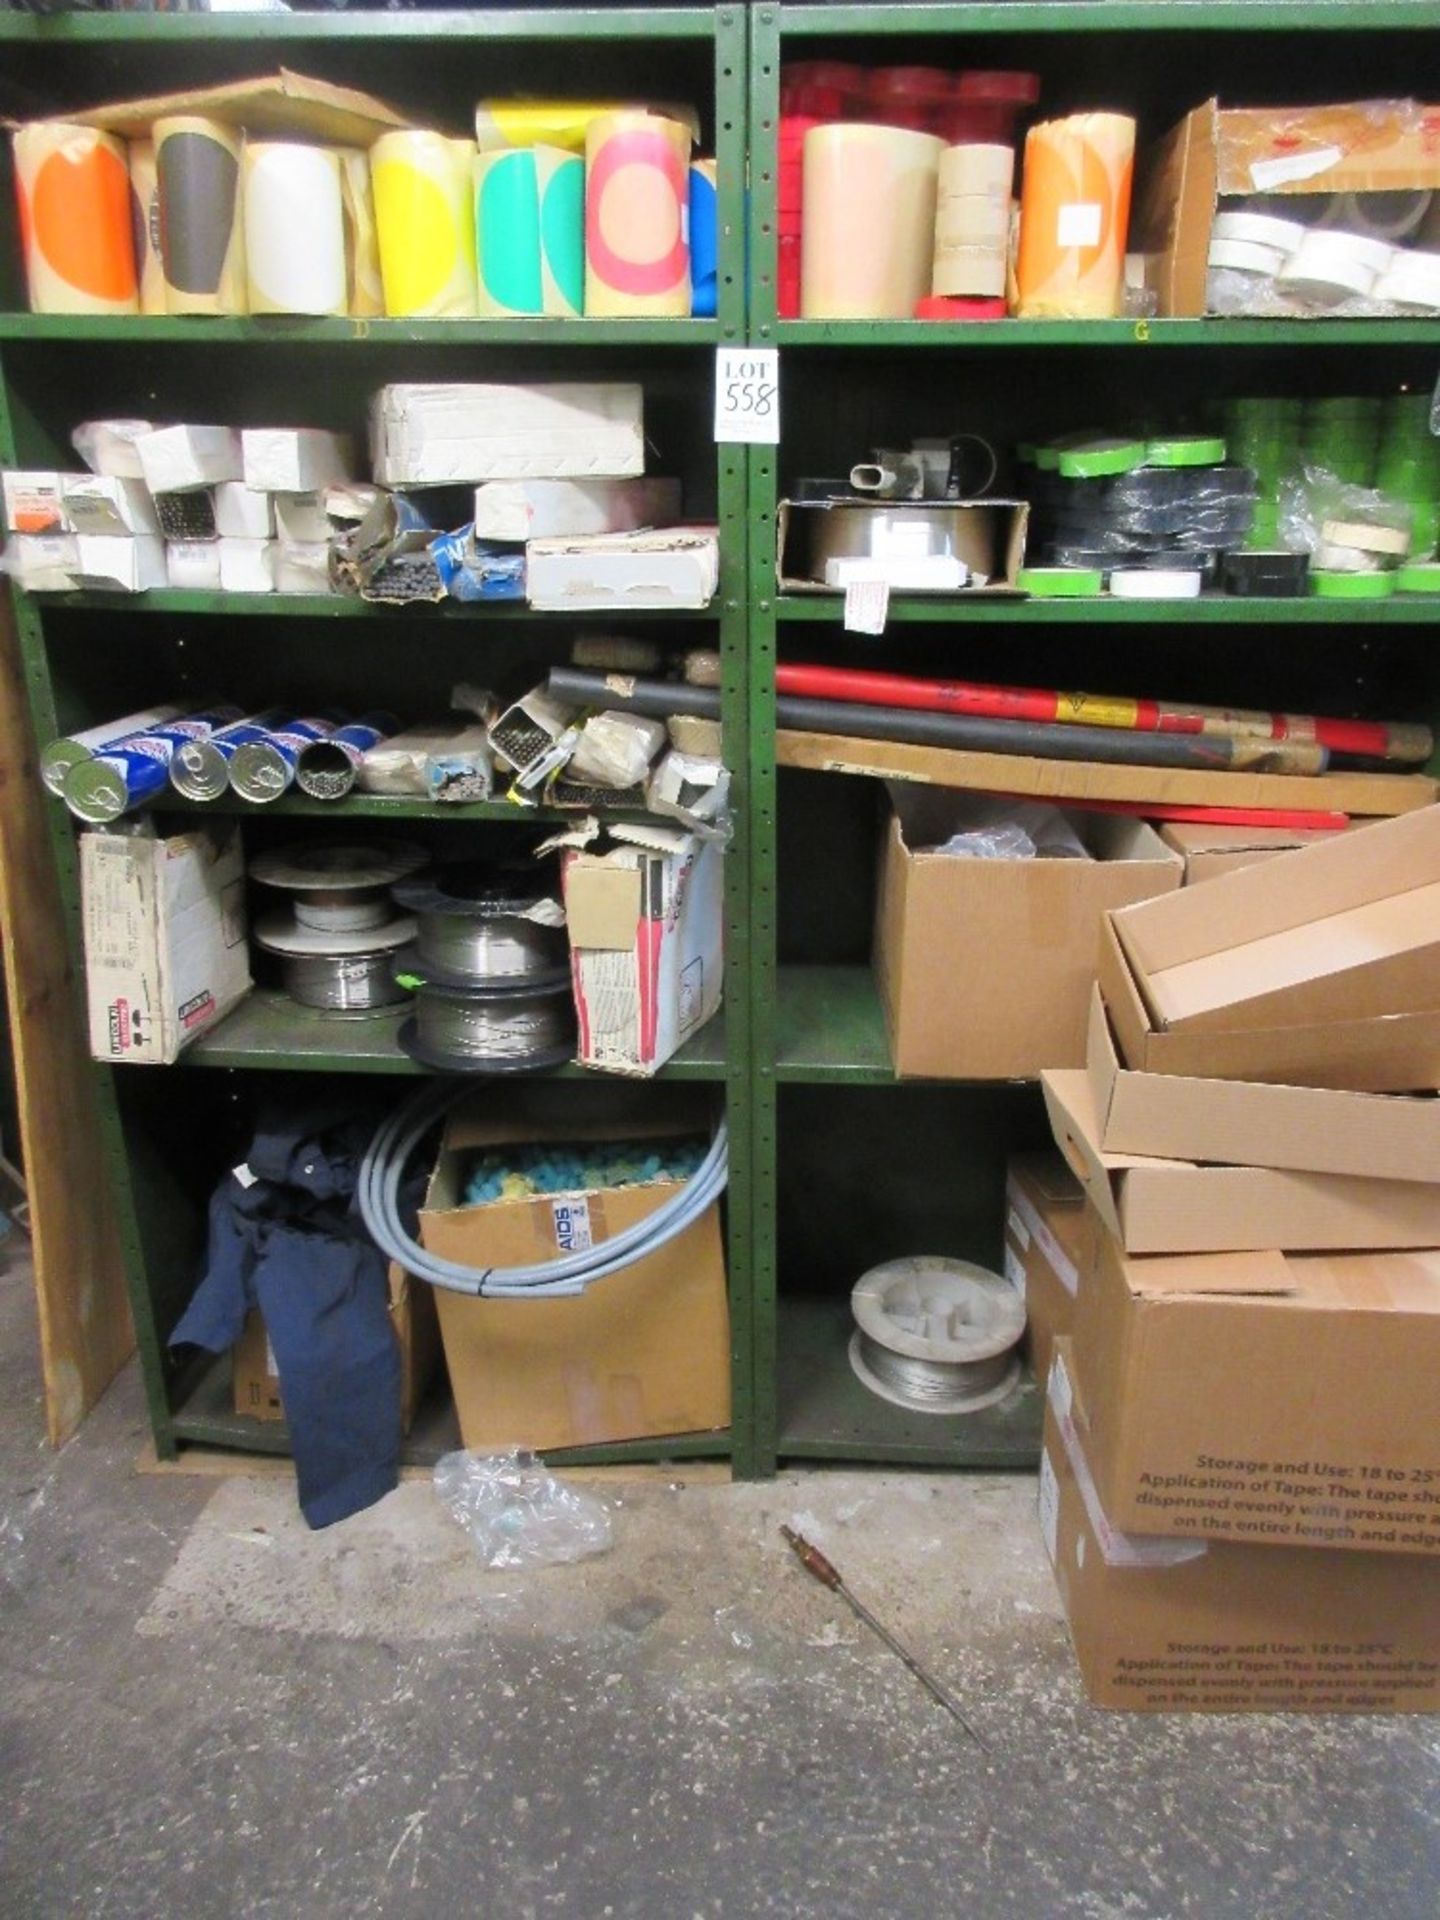 2 - steel shelves containing various welding rods, welding wire and tape and overalls